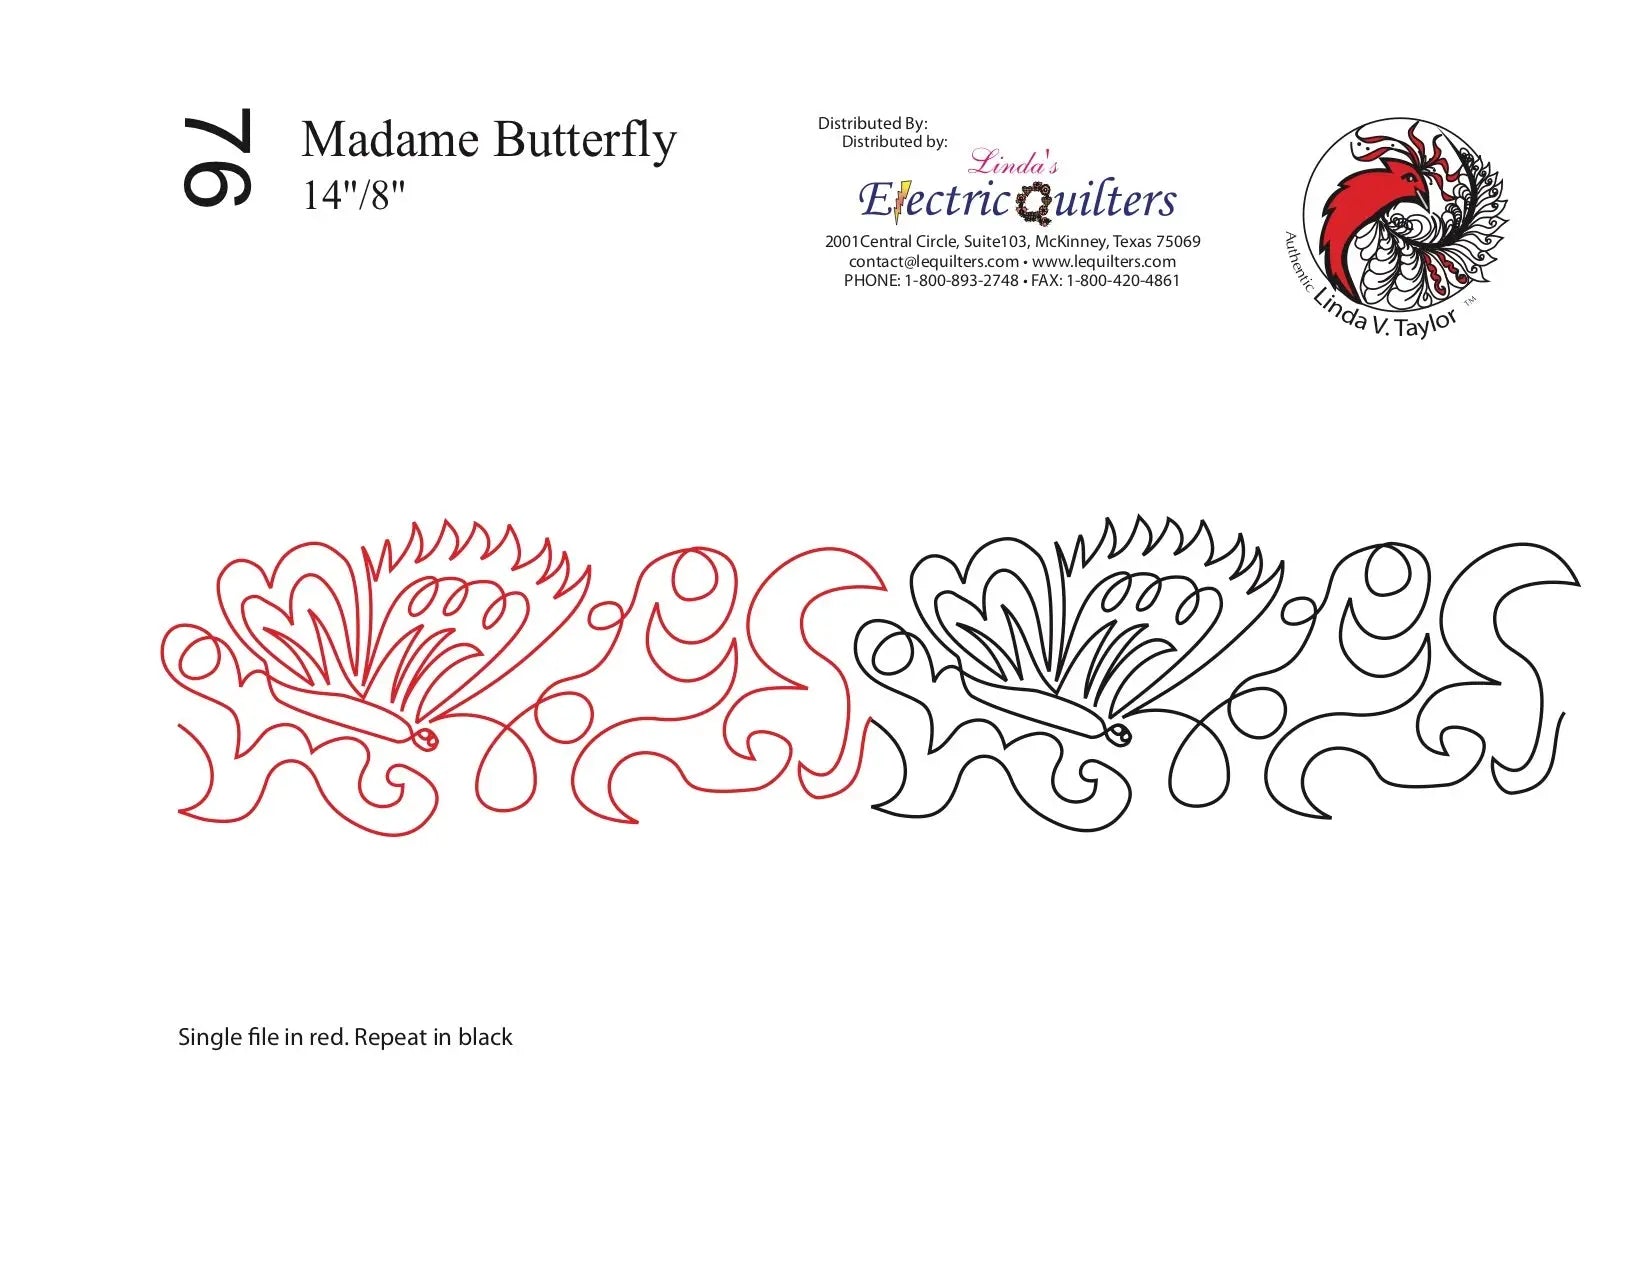 076 Madame Butterfly Pantograph by Linda V. Taylor